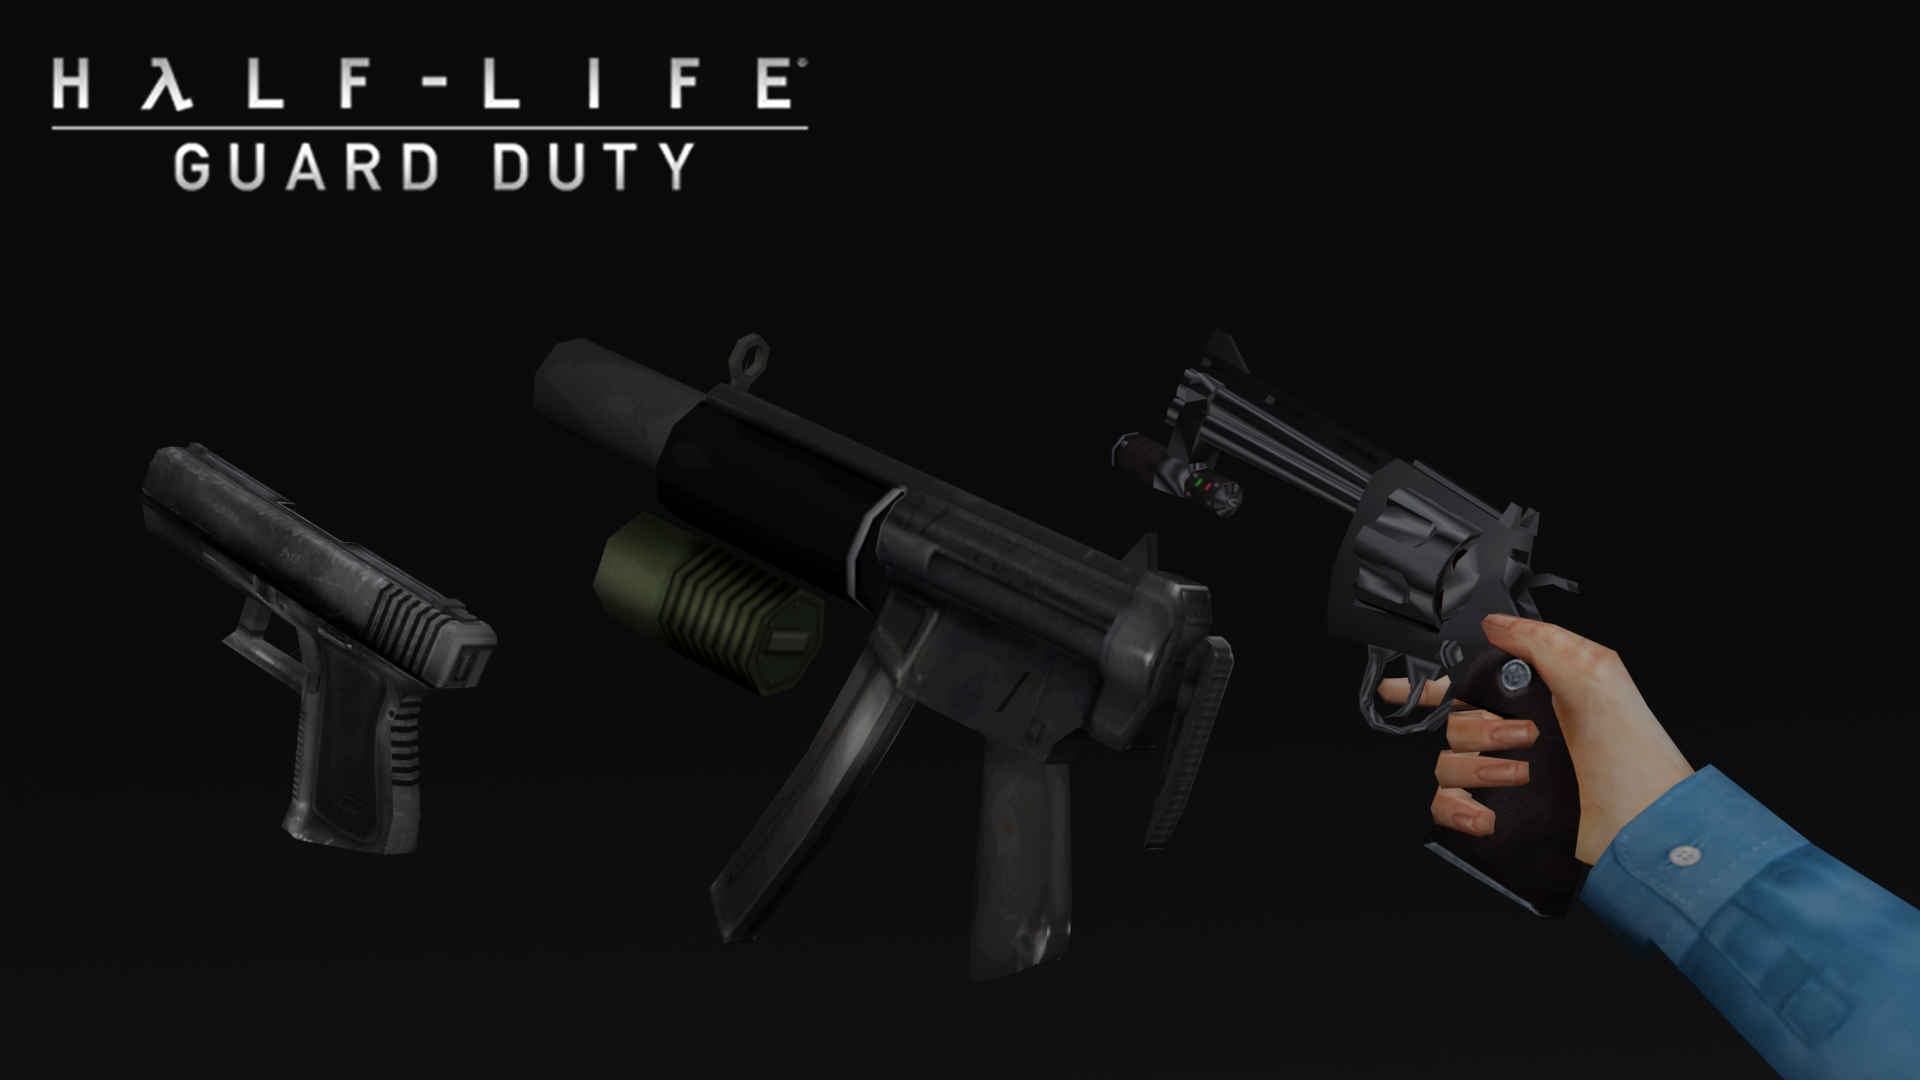 weapons render final 01a